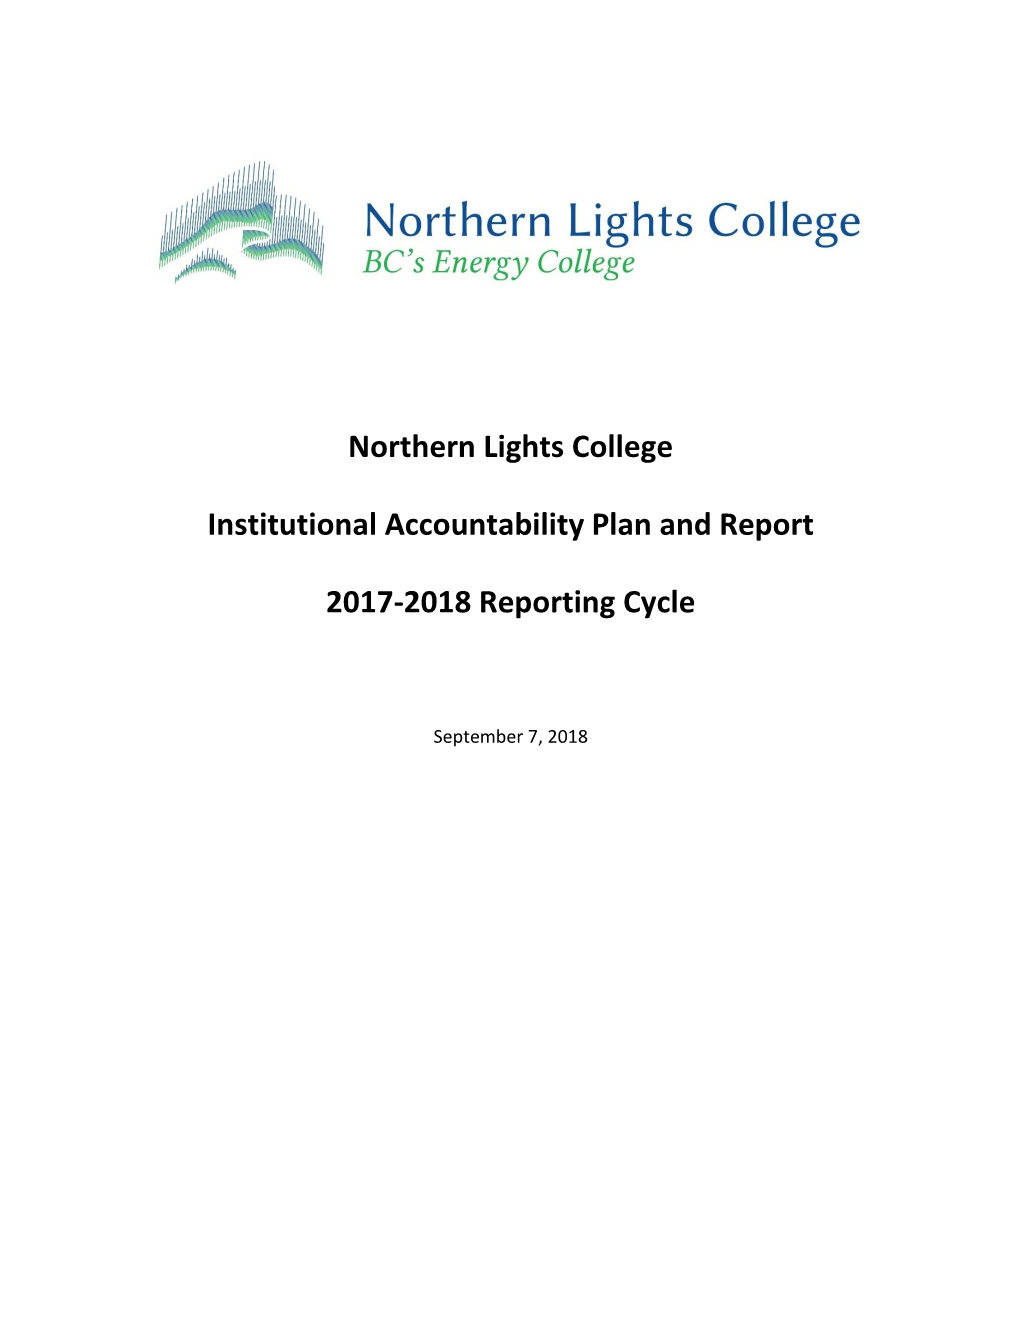 NLC Institutional Accountability Plan and Report 2017-18